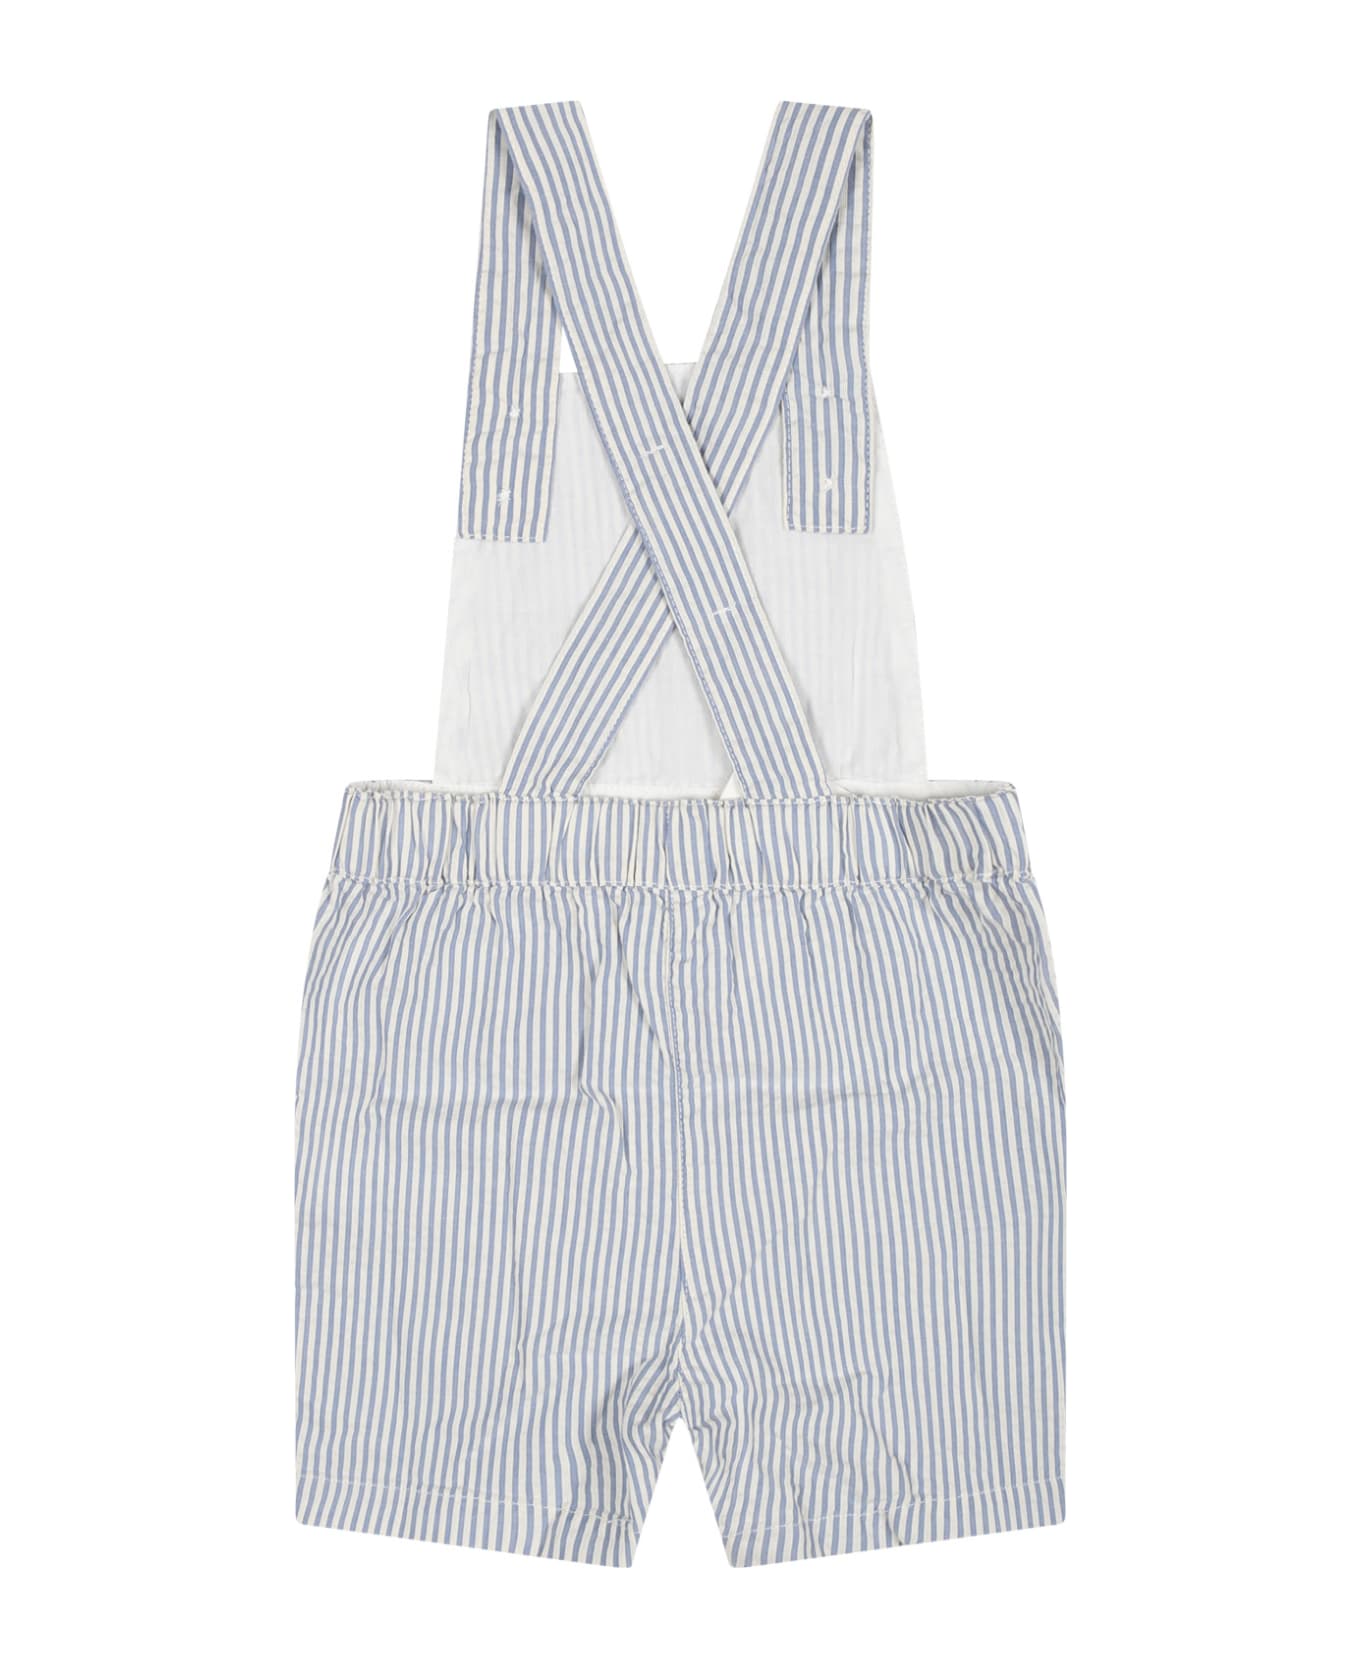 Petit Bateau Light Blue Dungarees For Baby Boy With Stripes - Light Blue